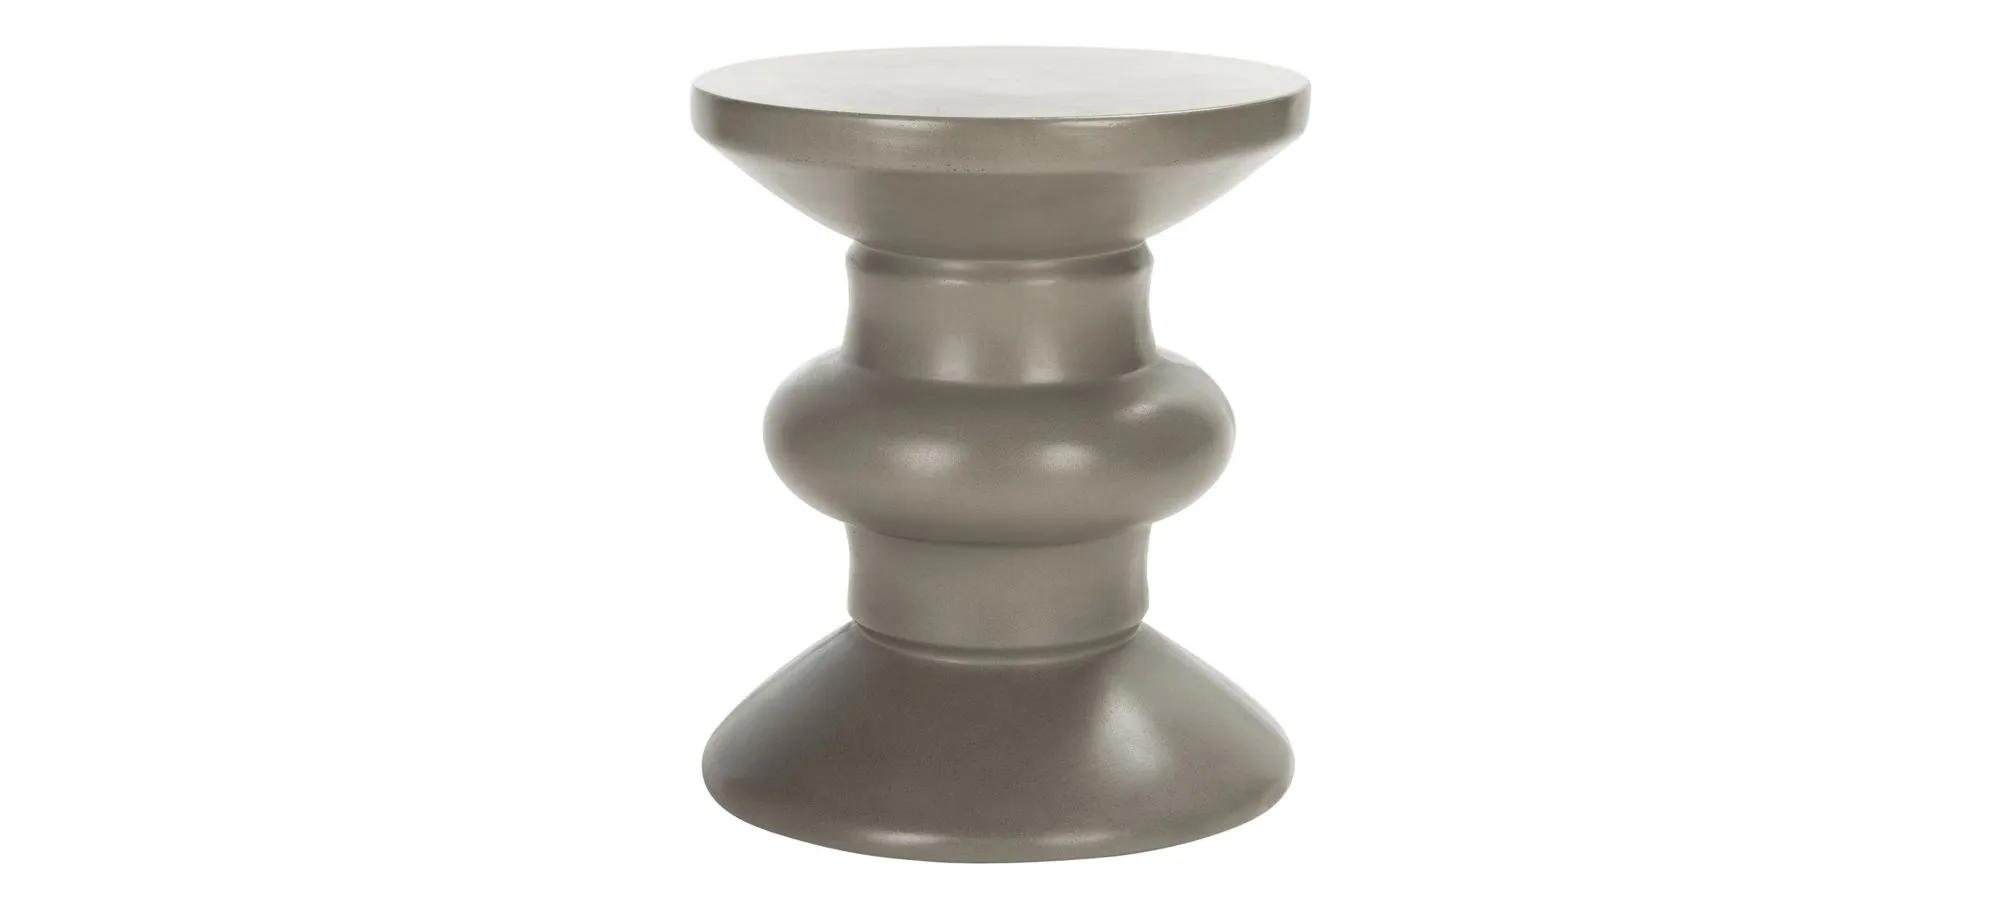 Brea Outdoor Concrete Accent Stool in Liberty Bronze by Safavieh